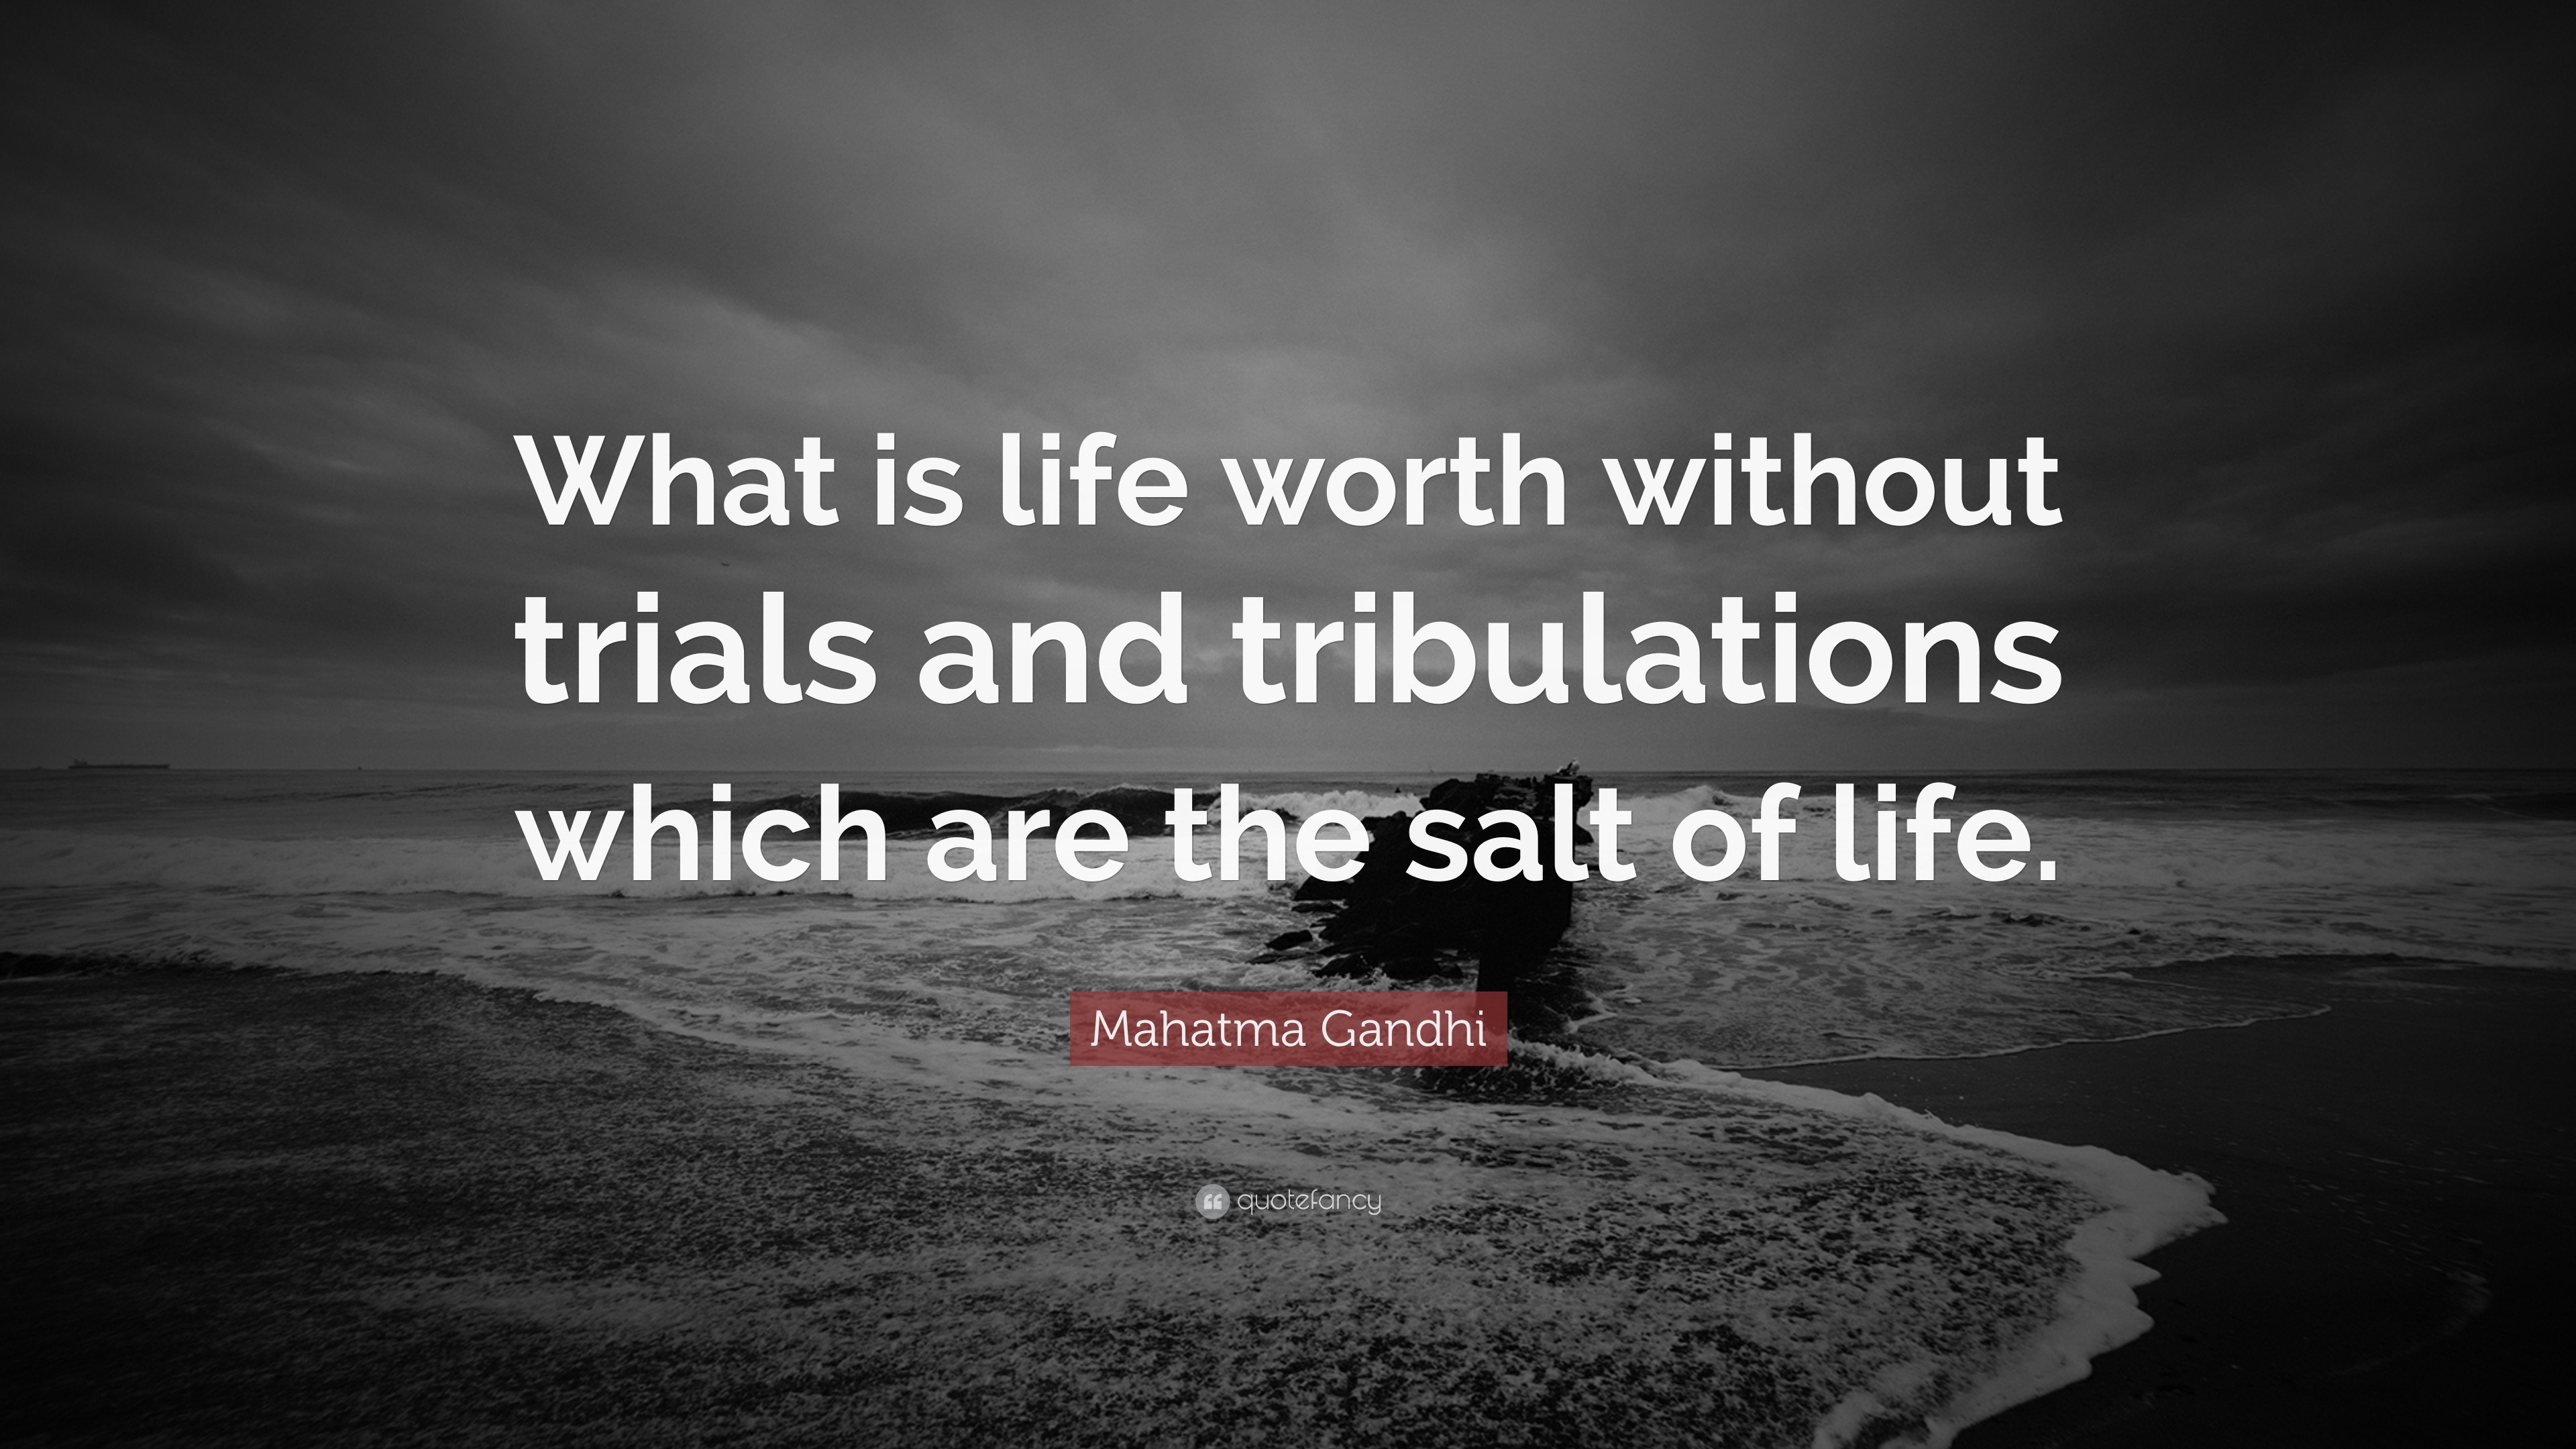 3840x2160 Mahatma Gandhi Quote: “What is life worth without trials and tribulations  which are the